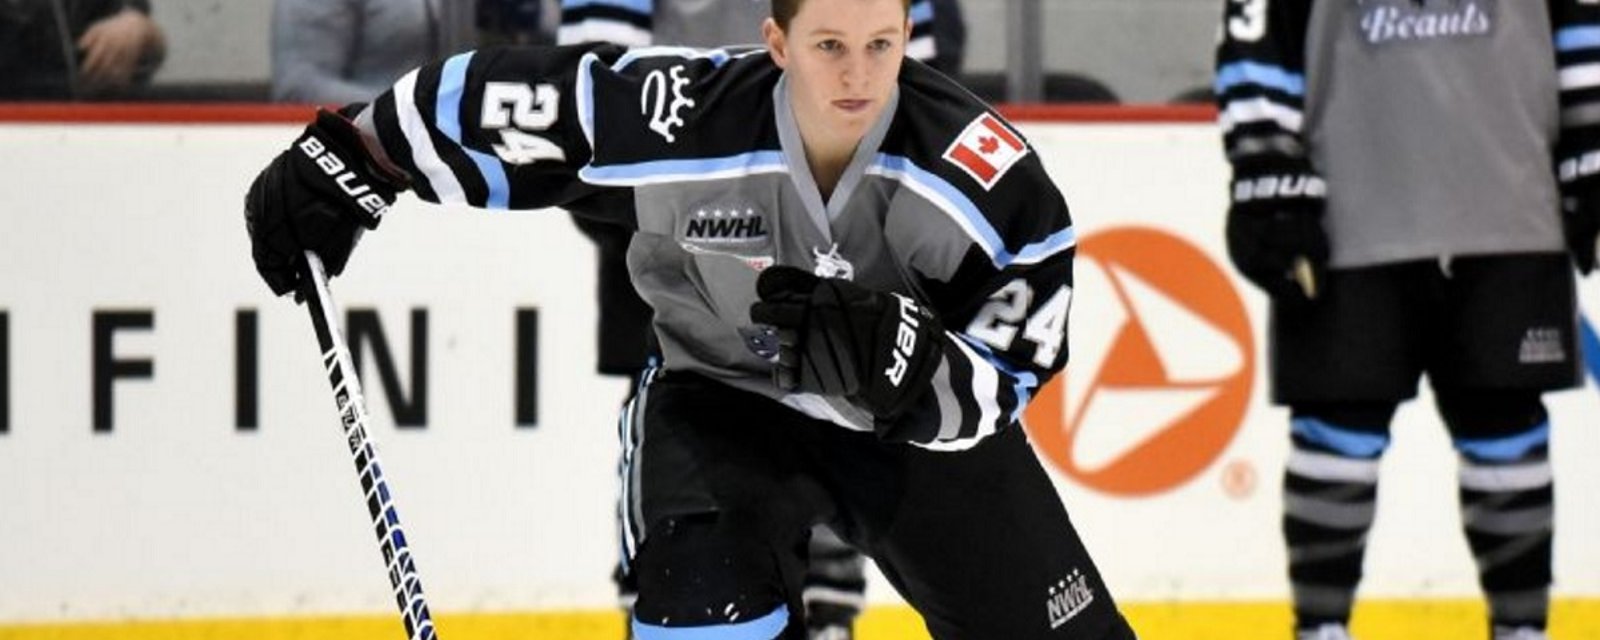 Hockey player comes out as the first transgender athlete in U.S. team sports.